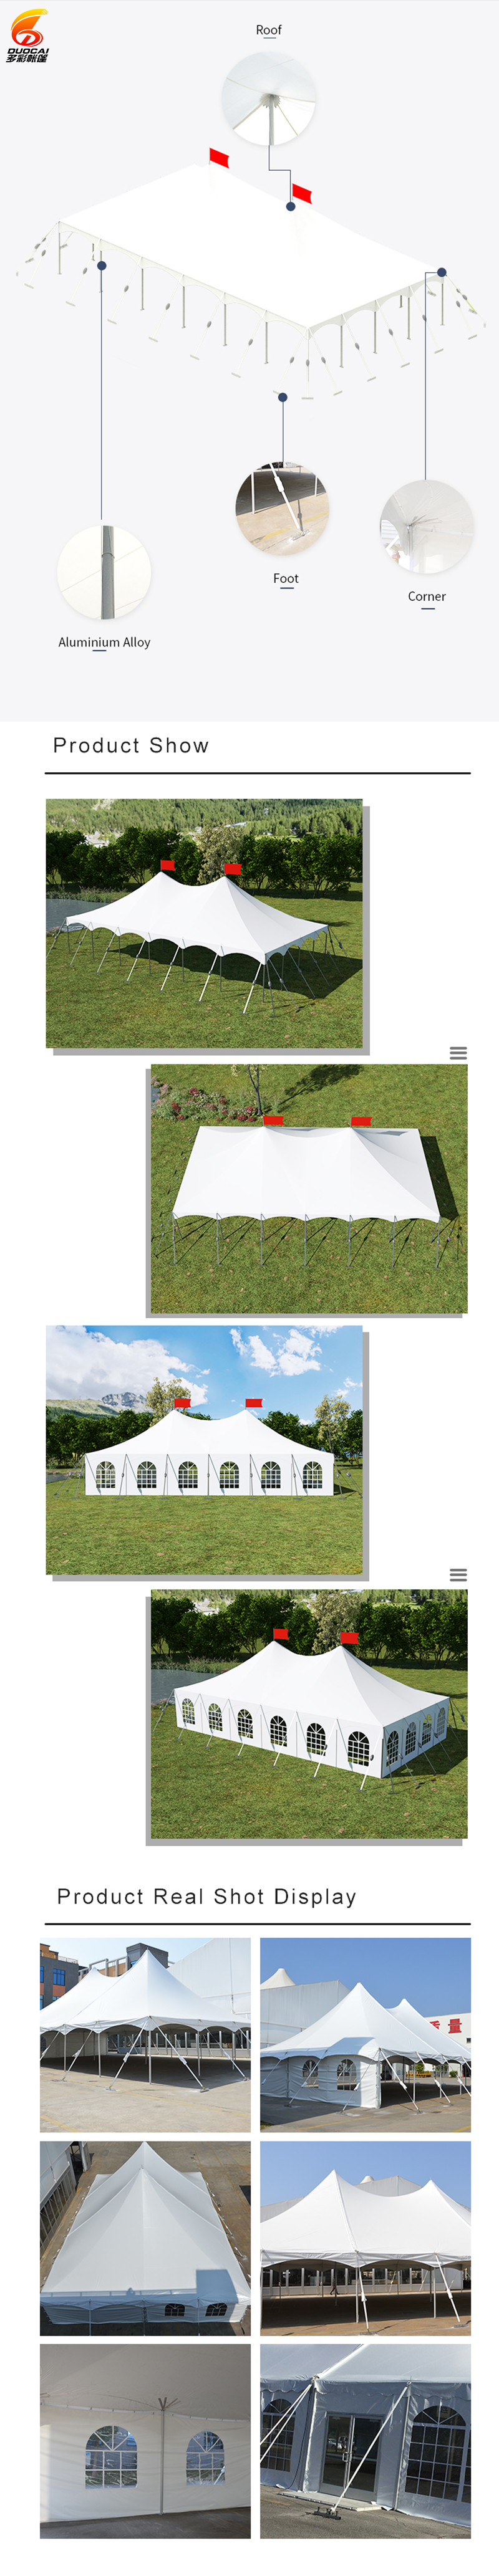 large Outdoor  Events High Peak Pole Wedding Party Tents